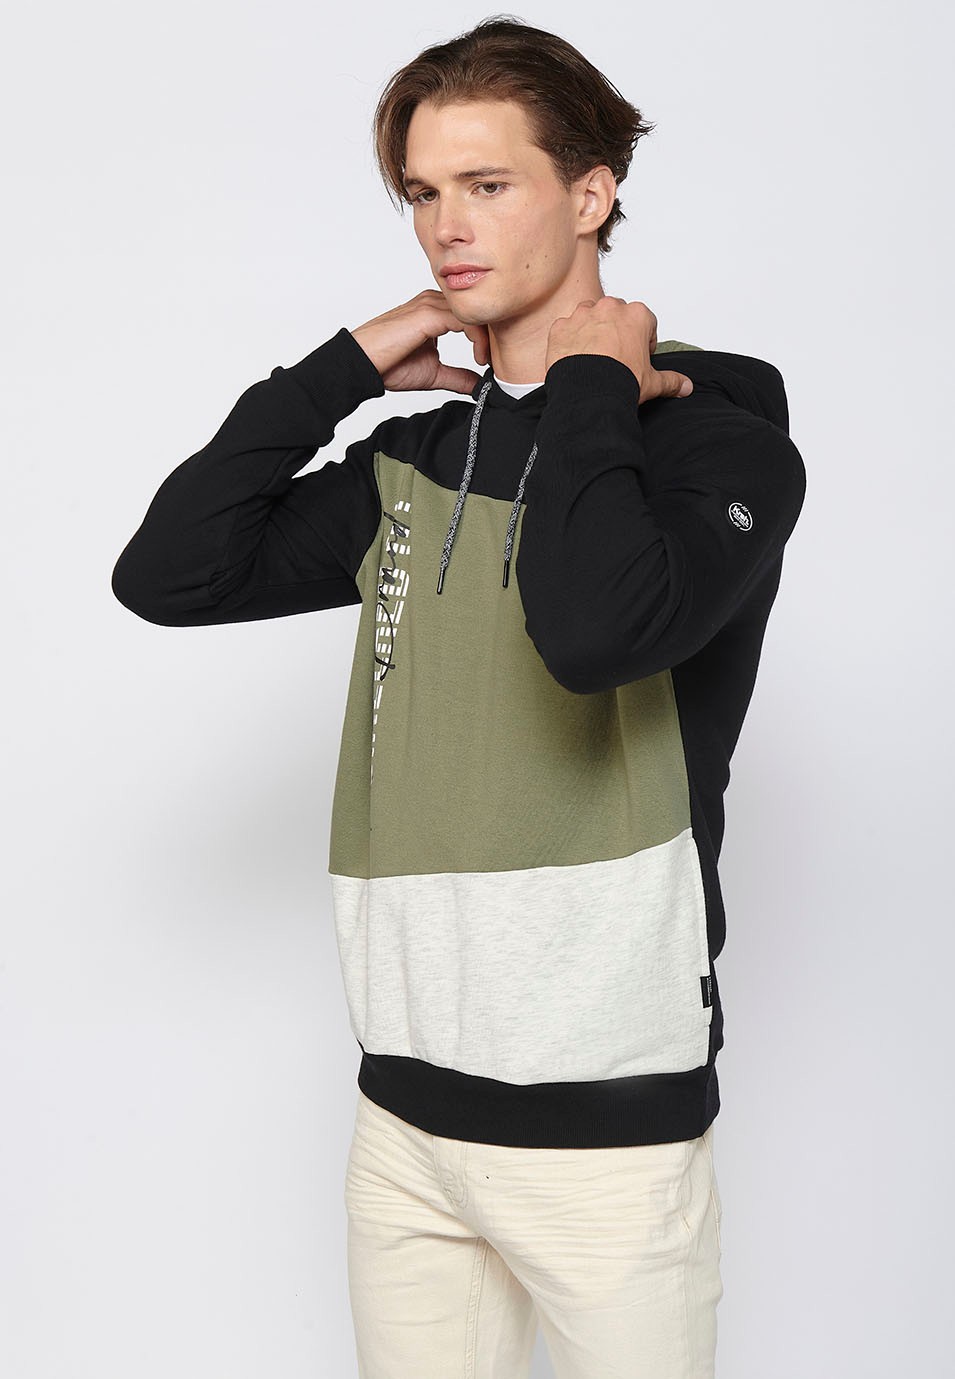 Long-sleeved sweatshirt with hooded collar and front details in Khaki color for Men